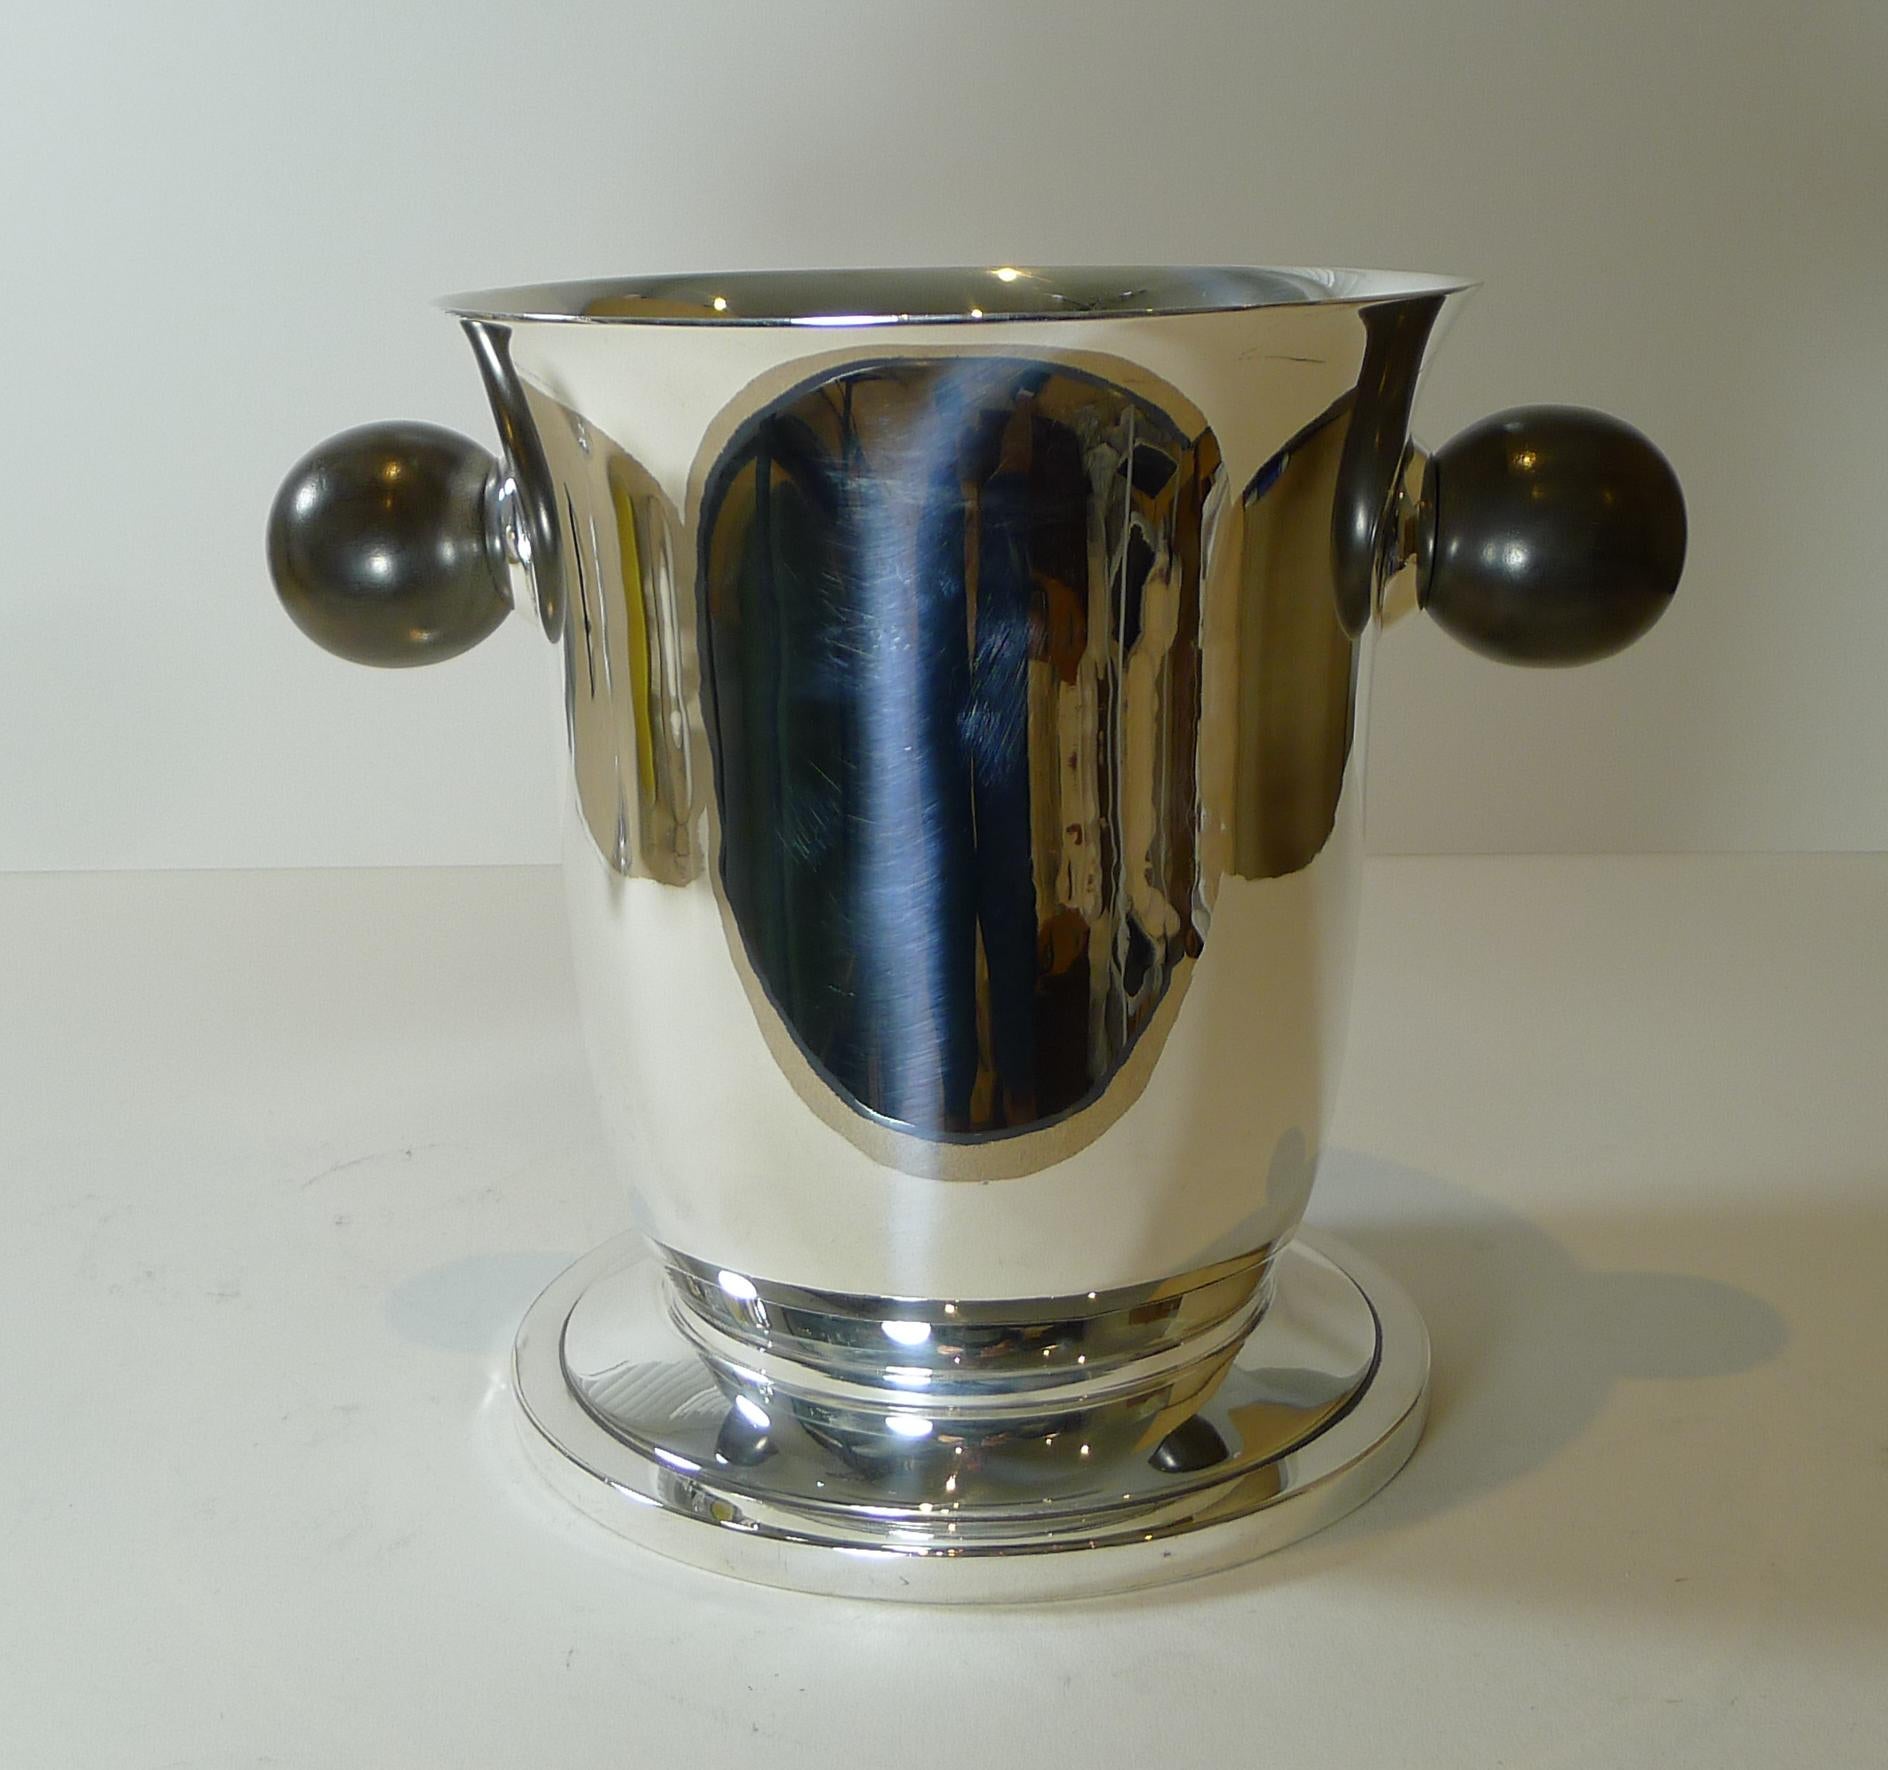 A stunning and stylish antique French champagne bucket or wine cooler in silver plate with stunning turned wooden handles; a great modernist / art deco style but actually made earlier between 1901 and 1906.

The underside is fully marked by the